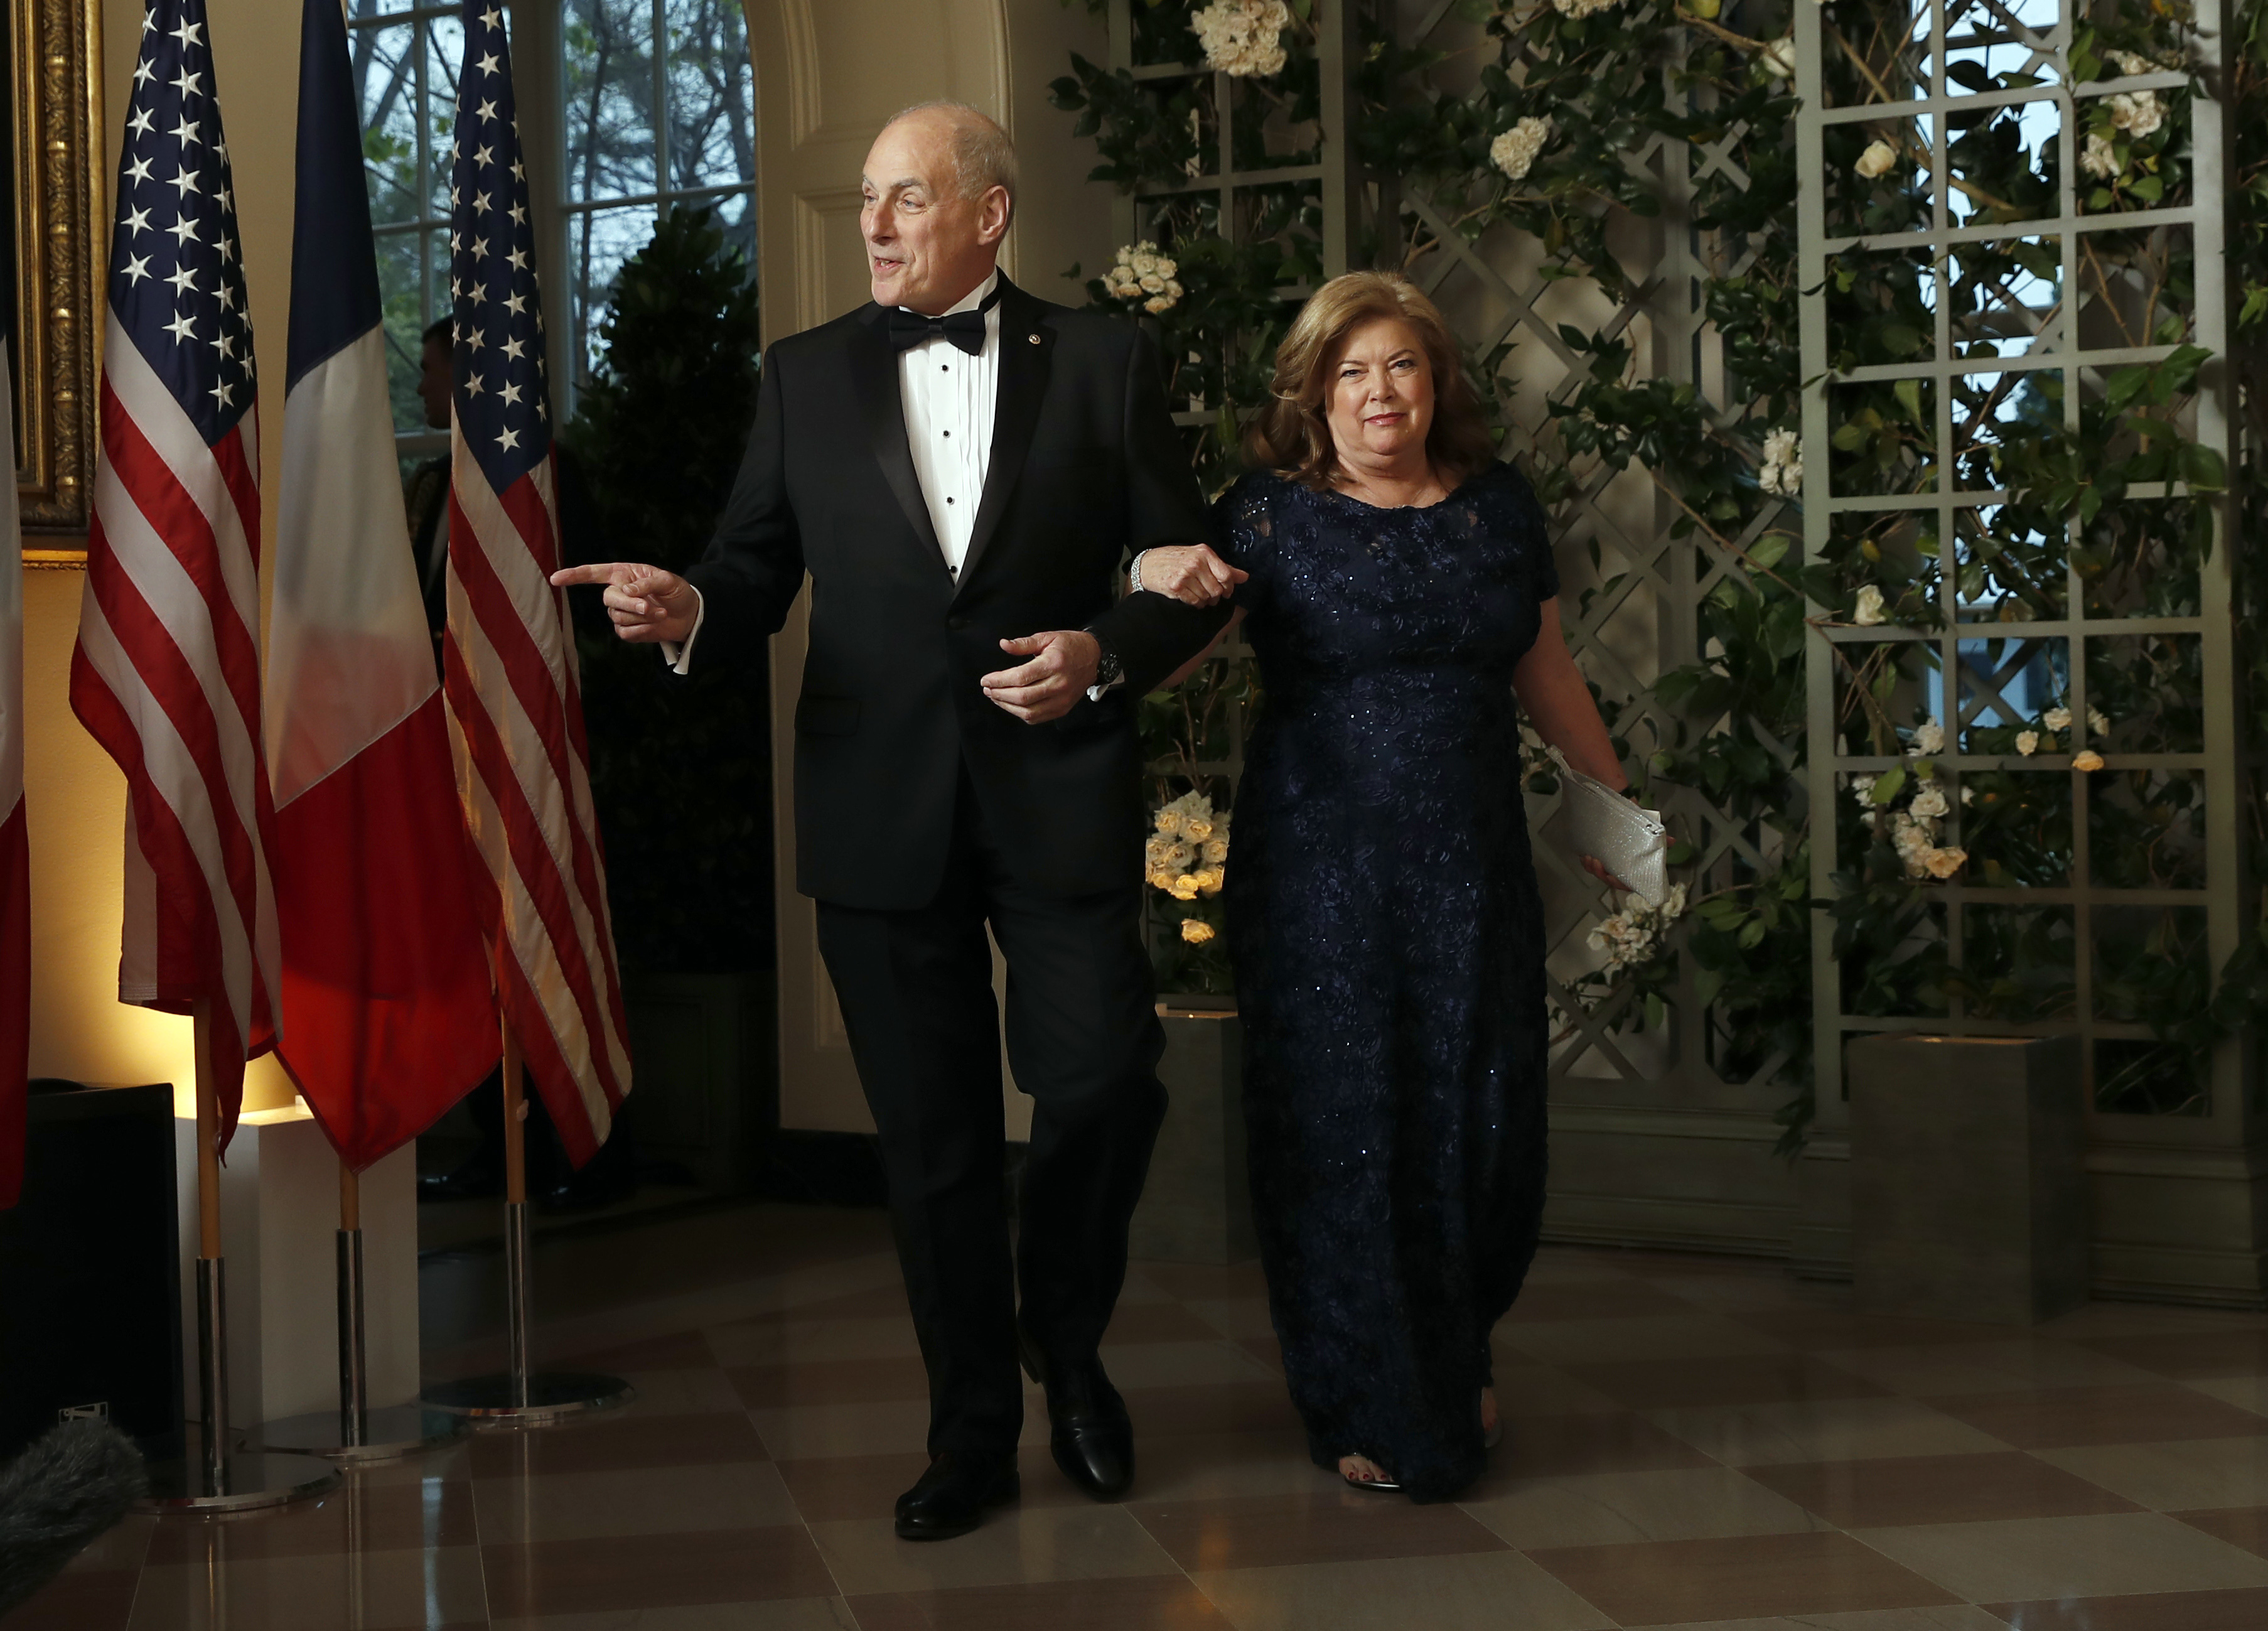 John Kelly and his wife Karen Kelly at a state dinner at the White House (Alex Brandon/AP)